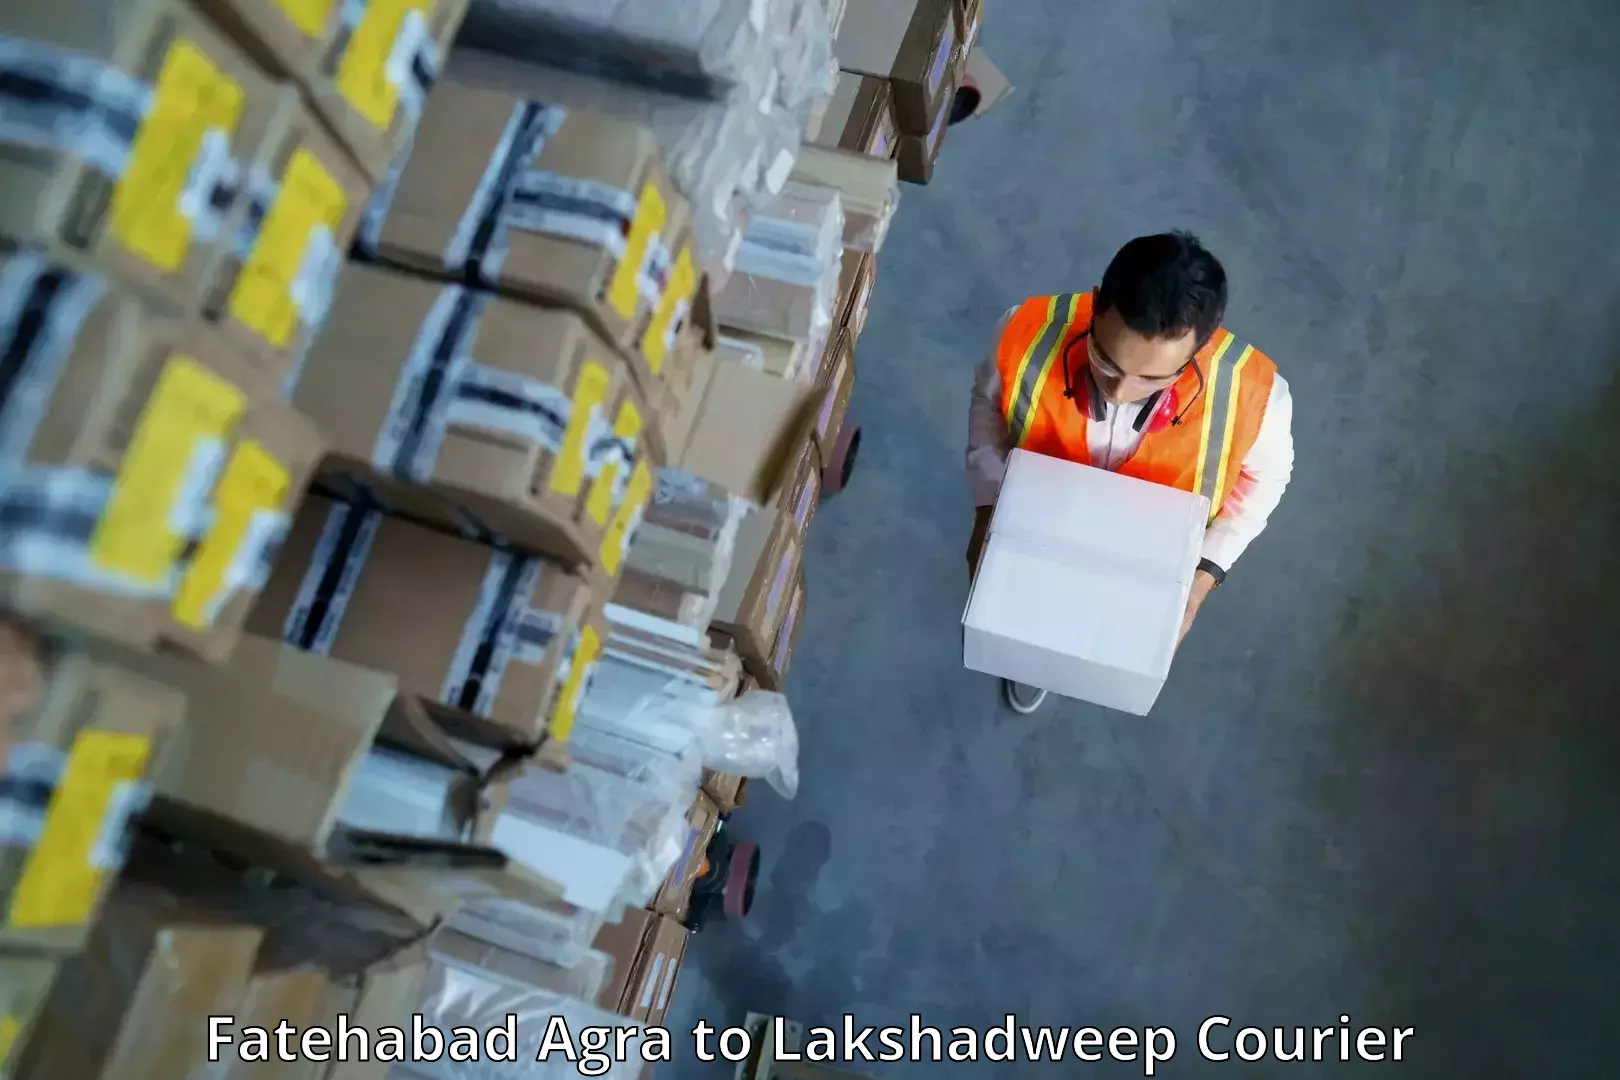 Ground shipping in Fatehabad Agra to Lakshadweep